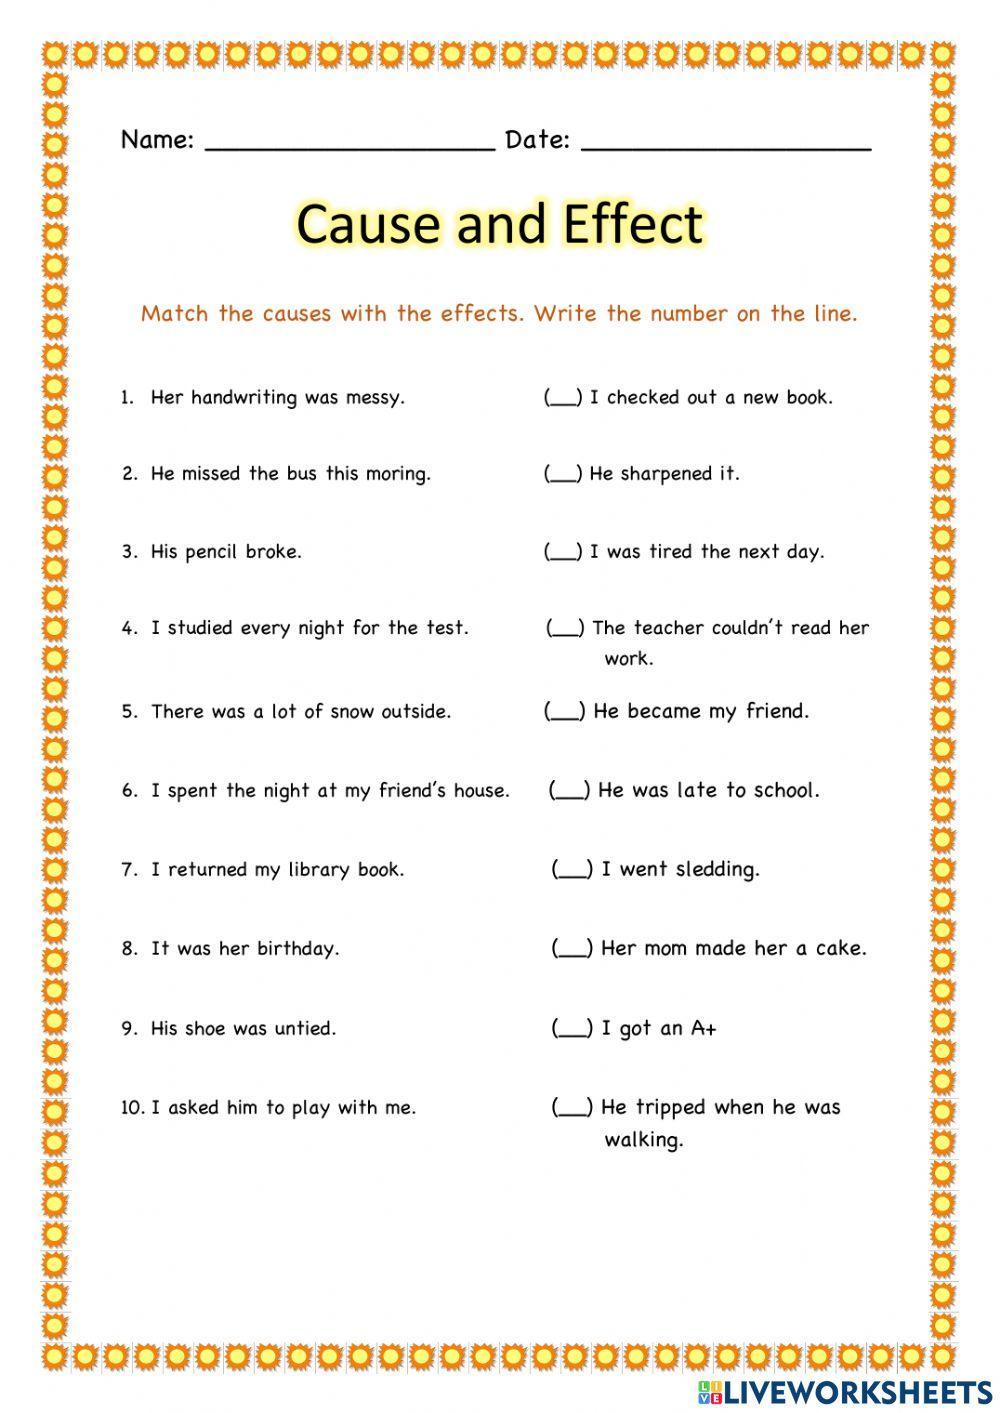 Cause and Effect online exercise for 3 | Live Worksheets